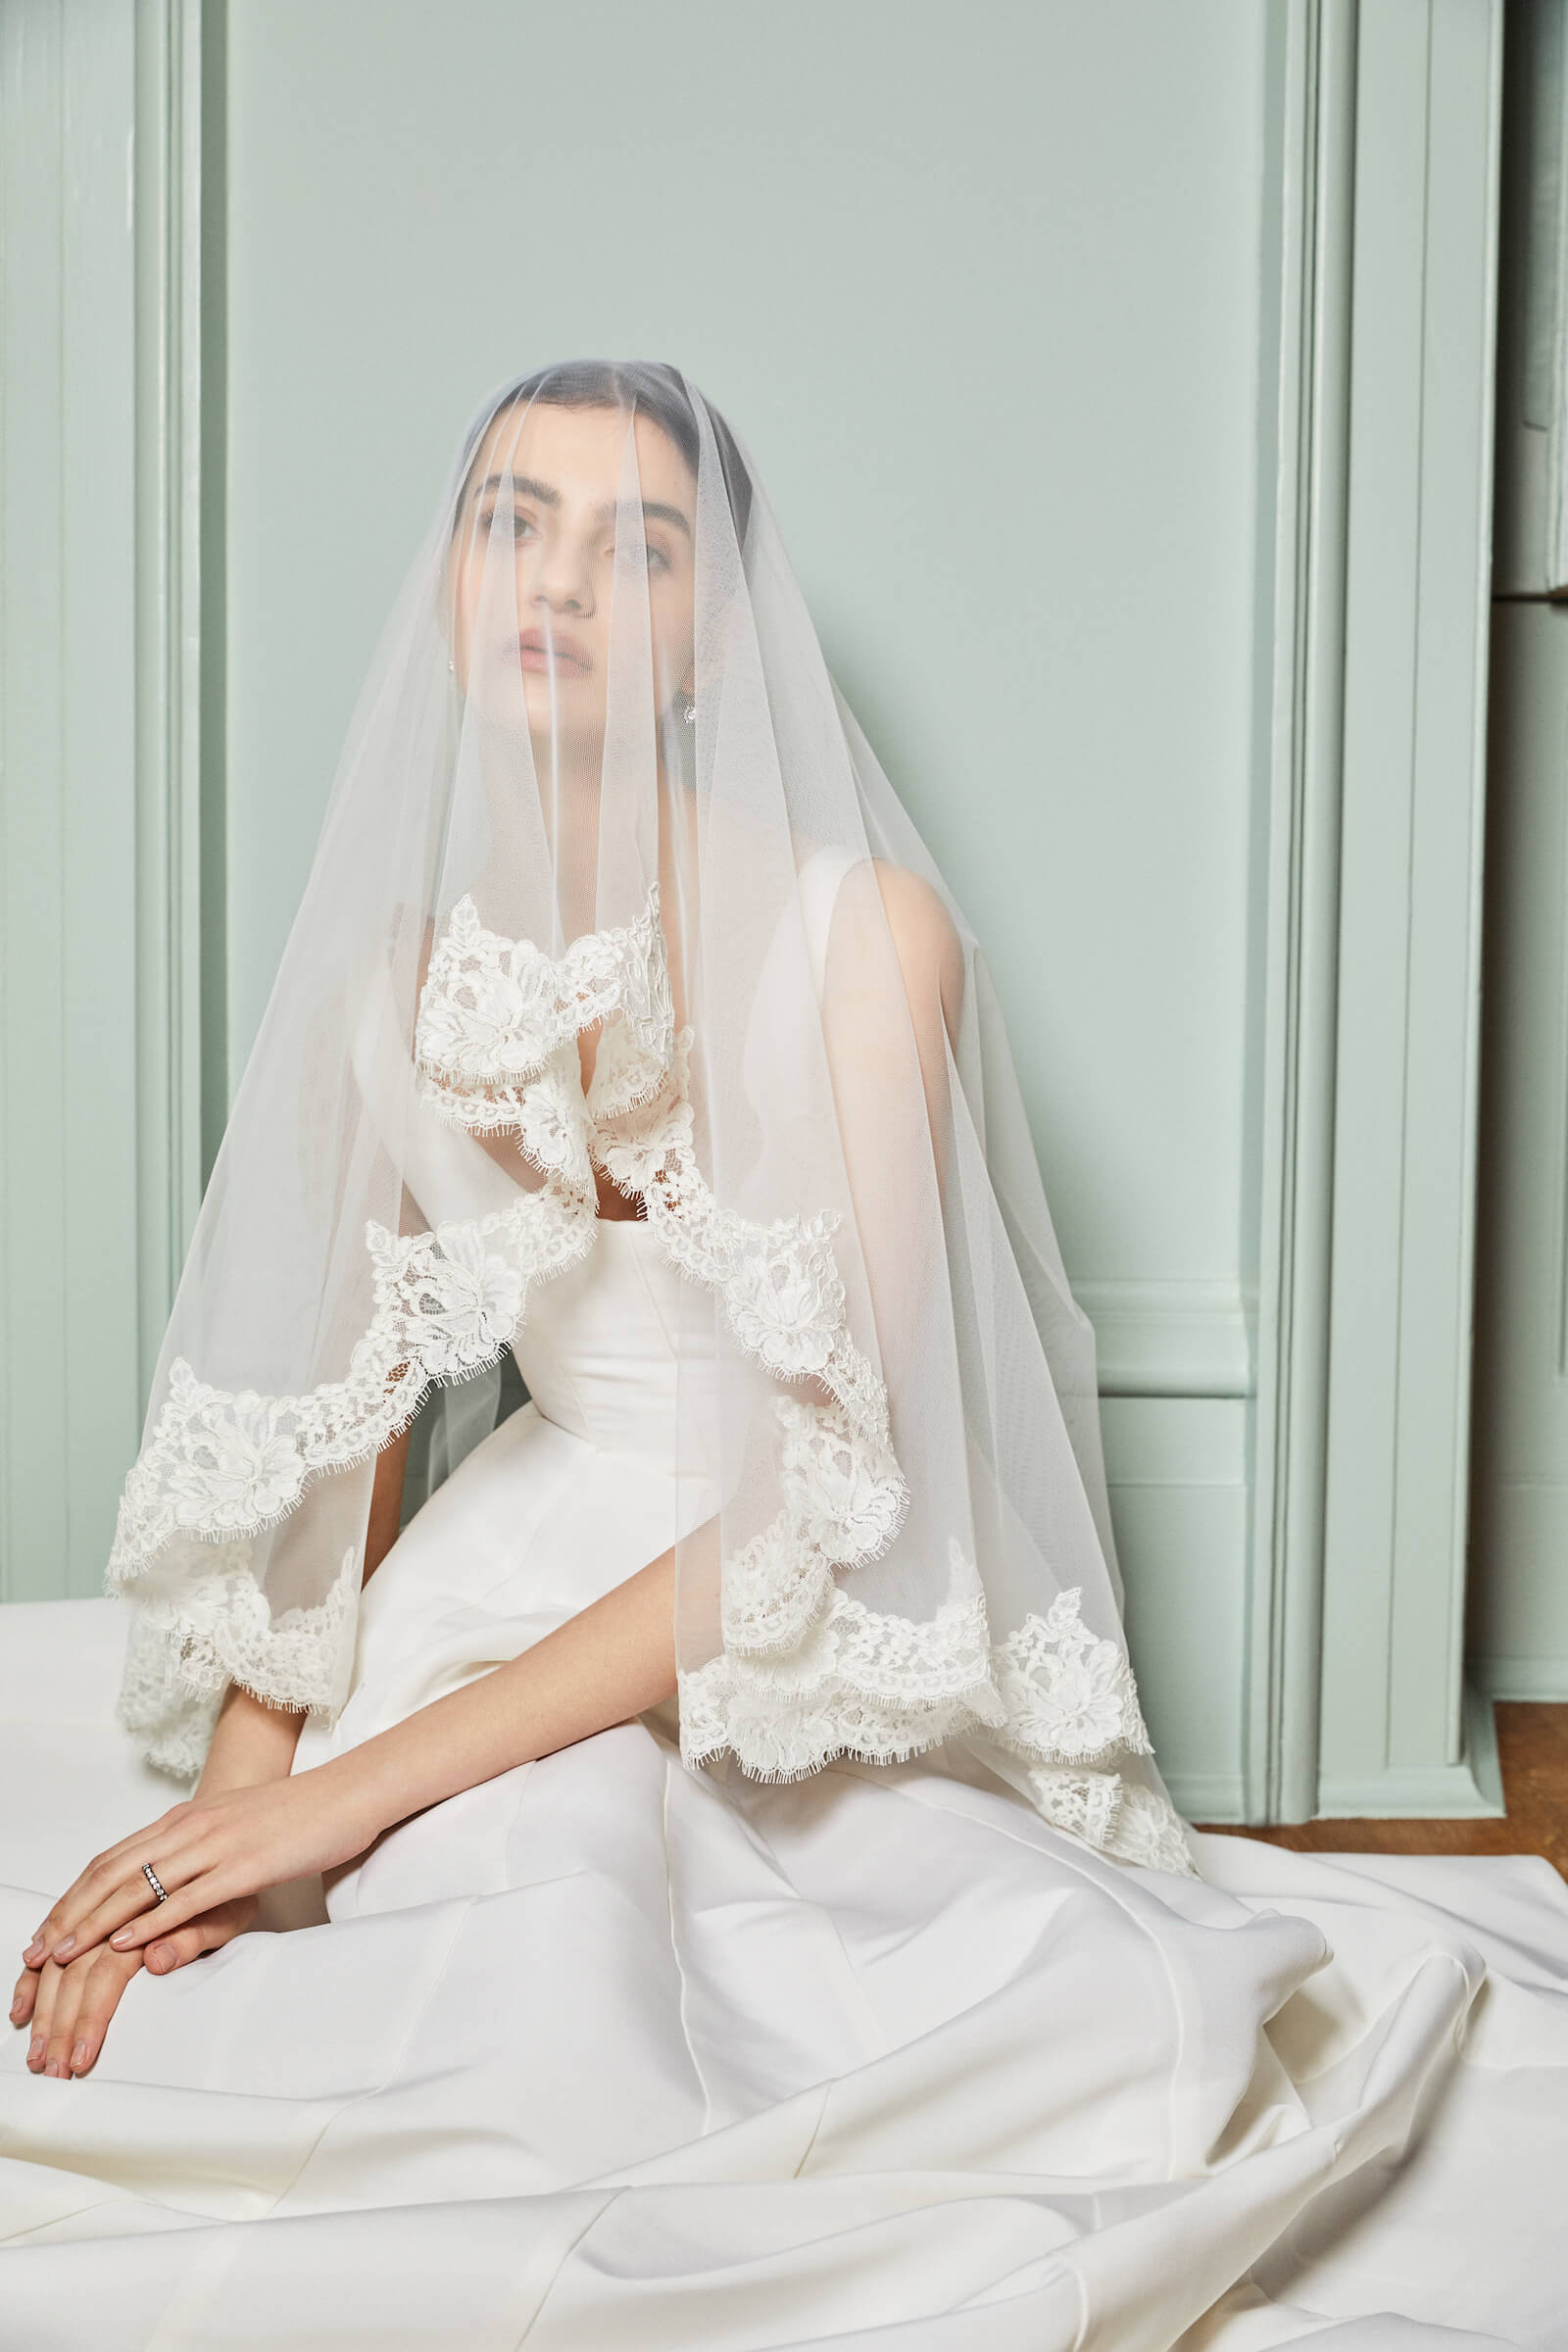 Maureen Circle Veil With Lace Edging